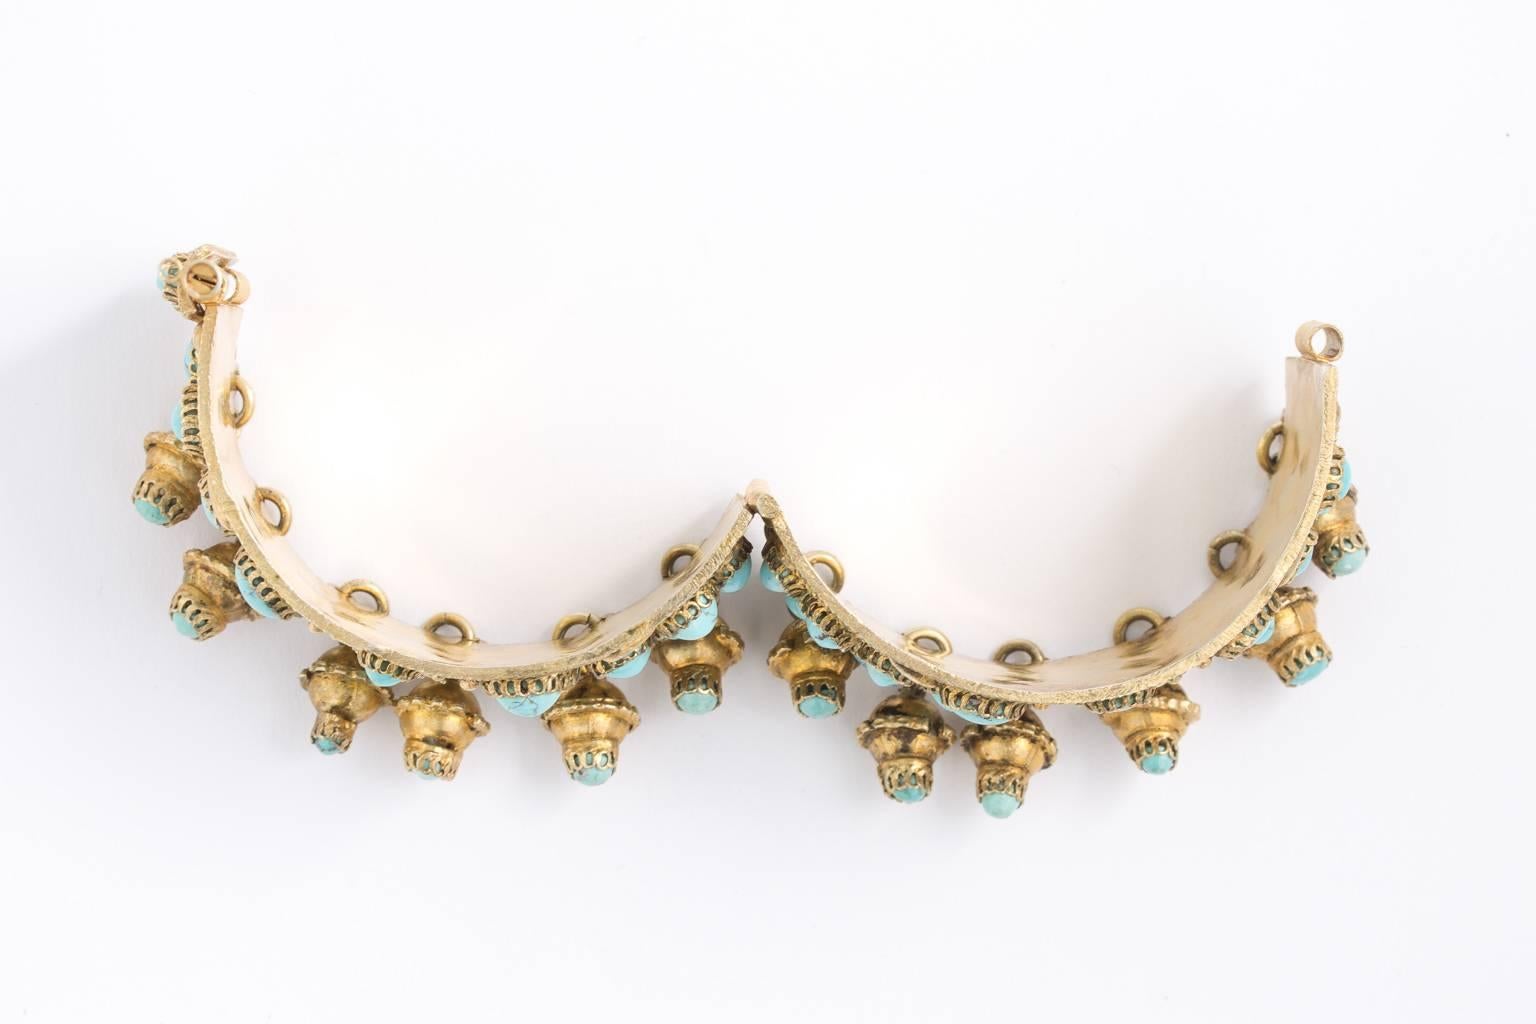 Vintage pre war Persian silver gilt bracelet with beautiful natural Persian turquoise and dangles. A rare form and hand made. Superb workmanship.
FINISH:Gilt
